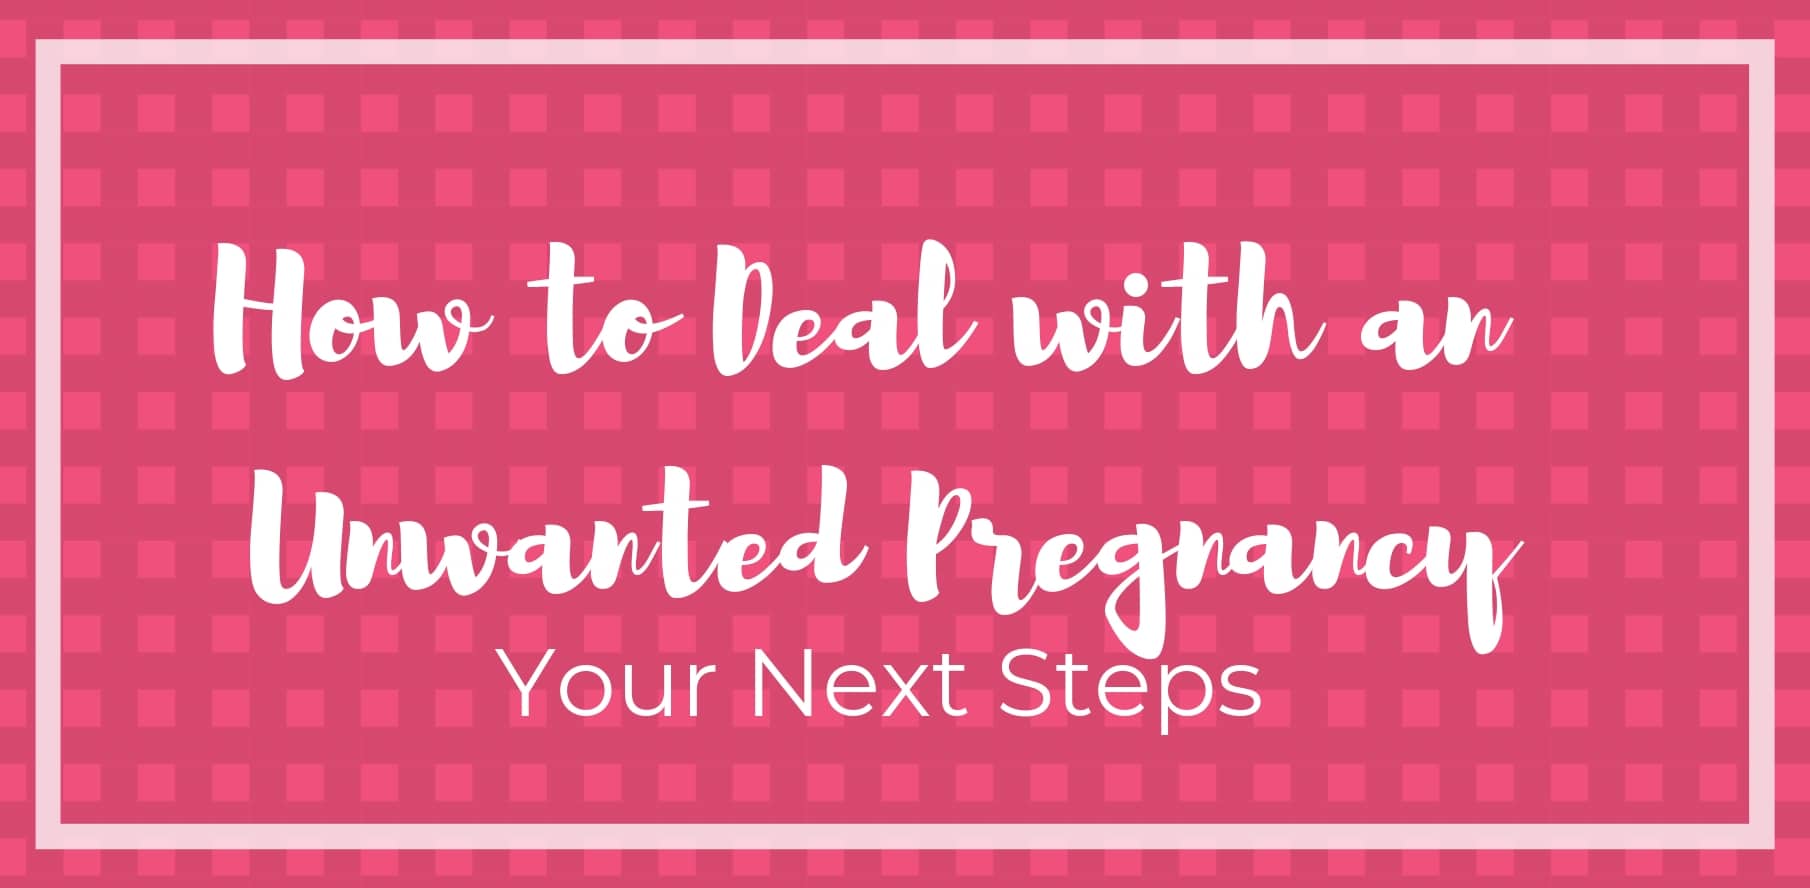 how to deal with an unwanted pregnancy